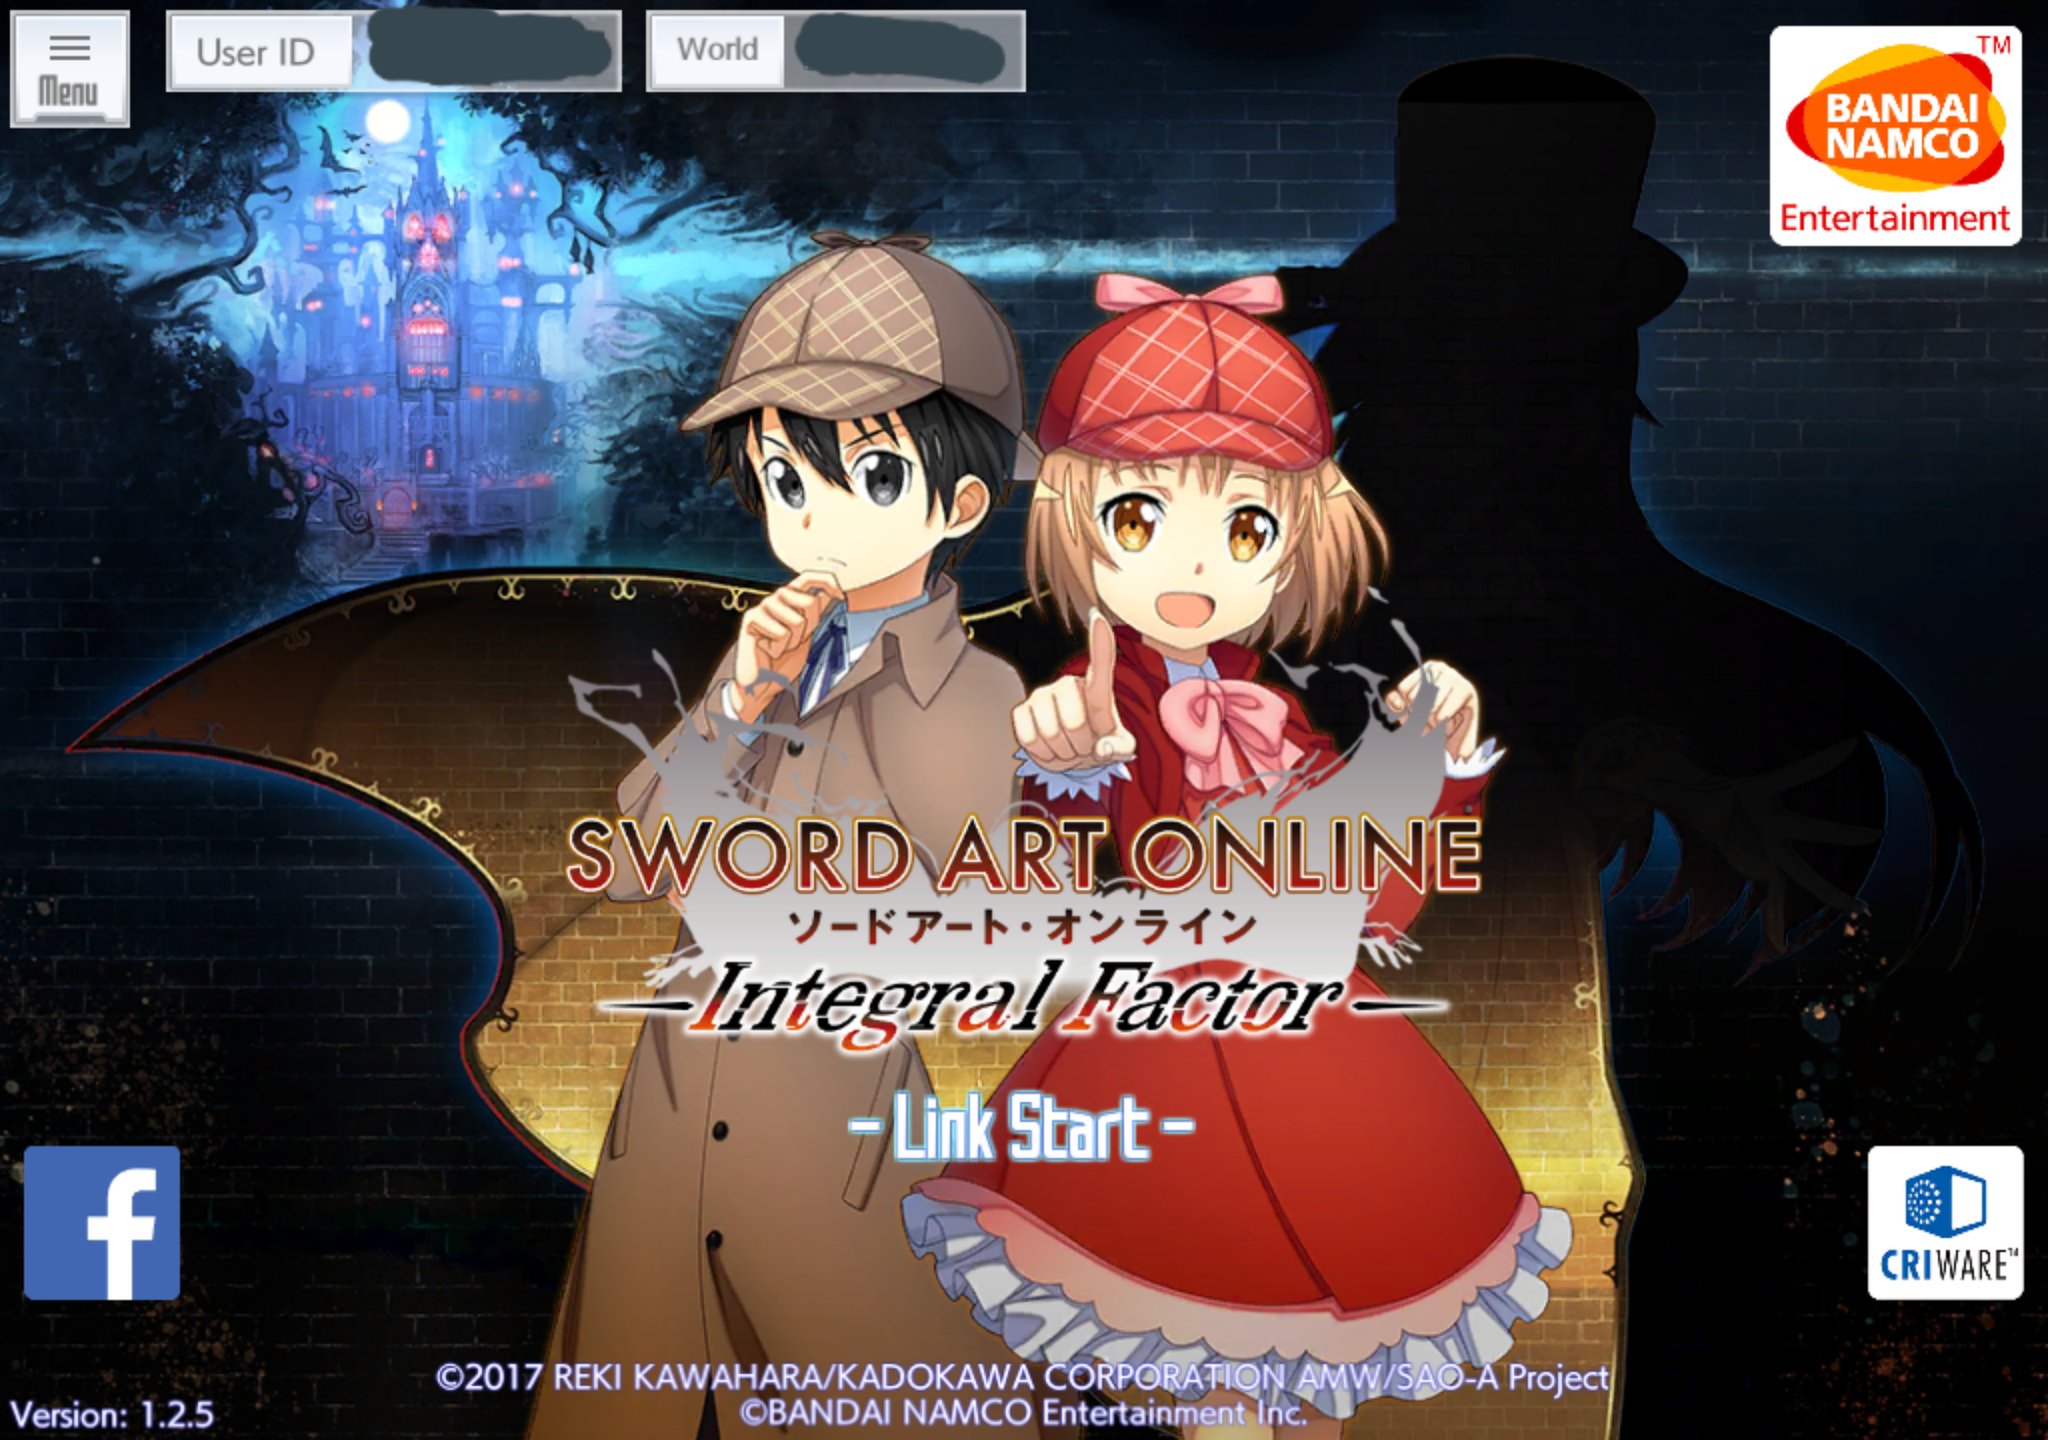 Sao Helpers Sword Art Online Integral Factor On Twitter Is That A Joke I M Not Sure If Bandai Wants Us To Believe This Is Good Game But The Title Screen Is